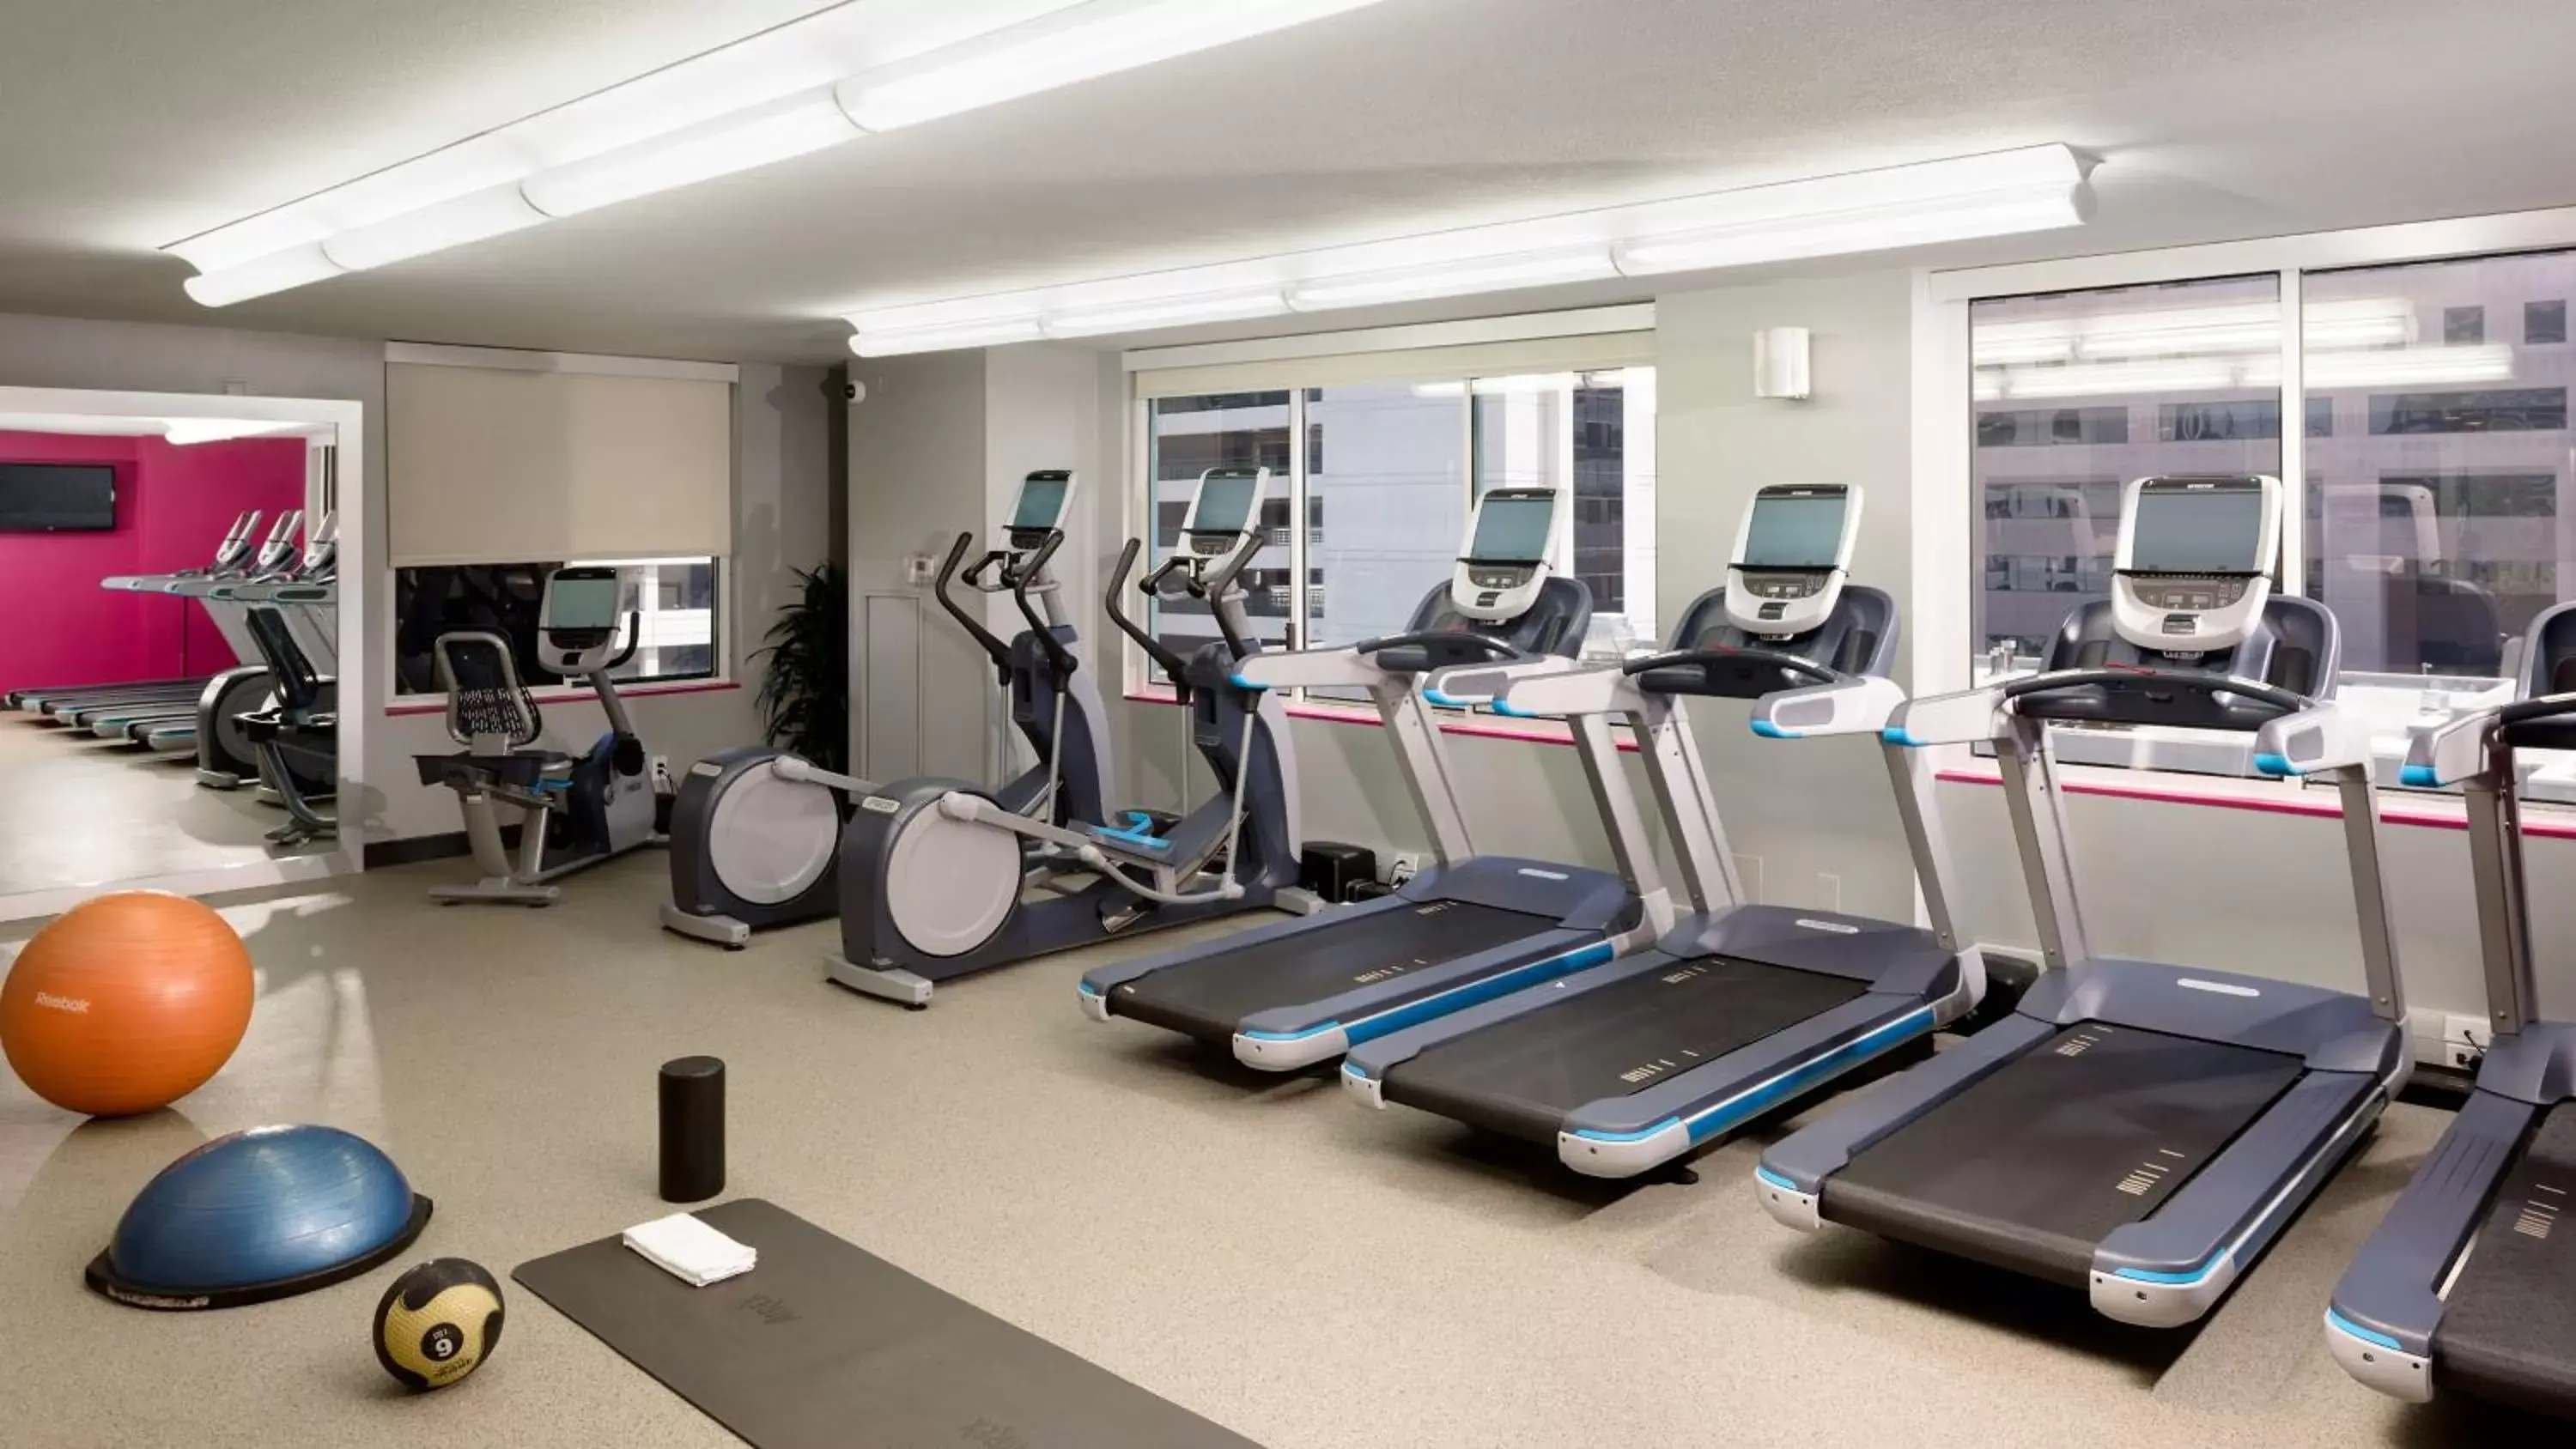 Fitness centre/facilities, Fitness Center/Facilities in Hilton Woodland Hills/ Los Angeles